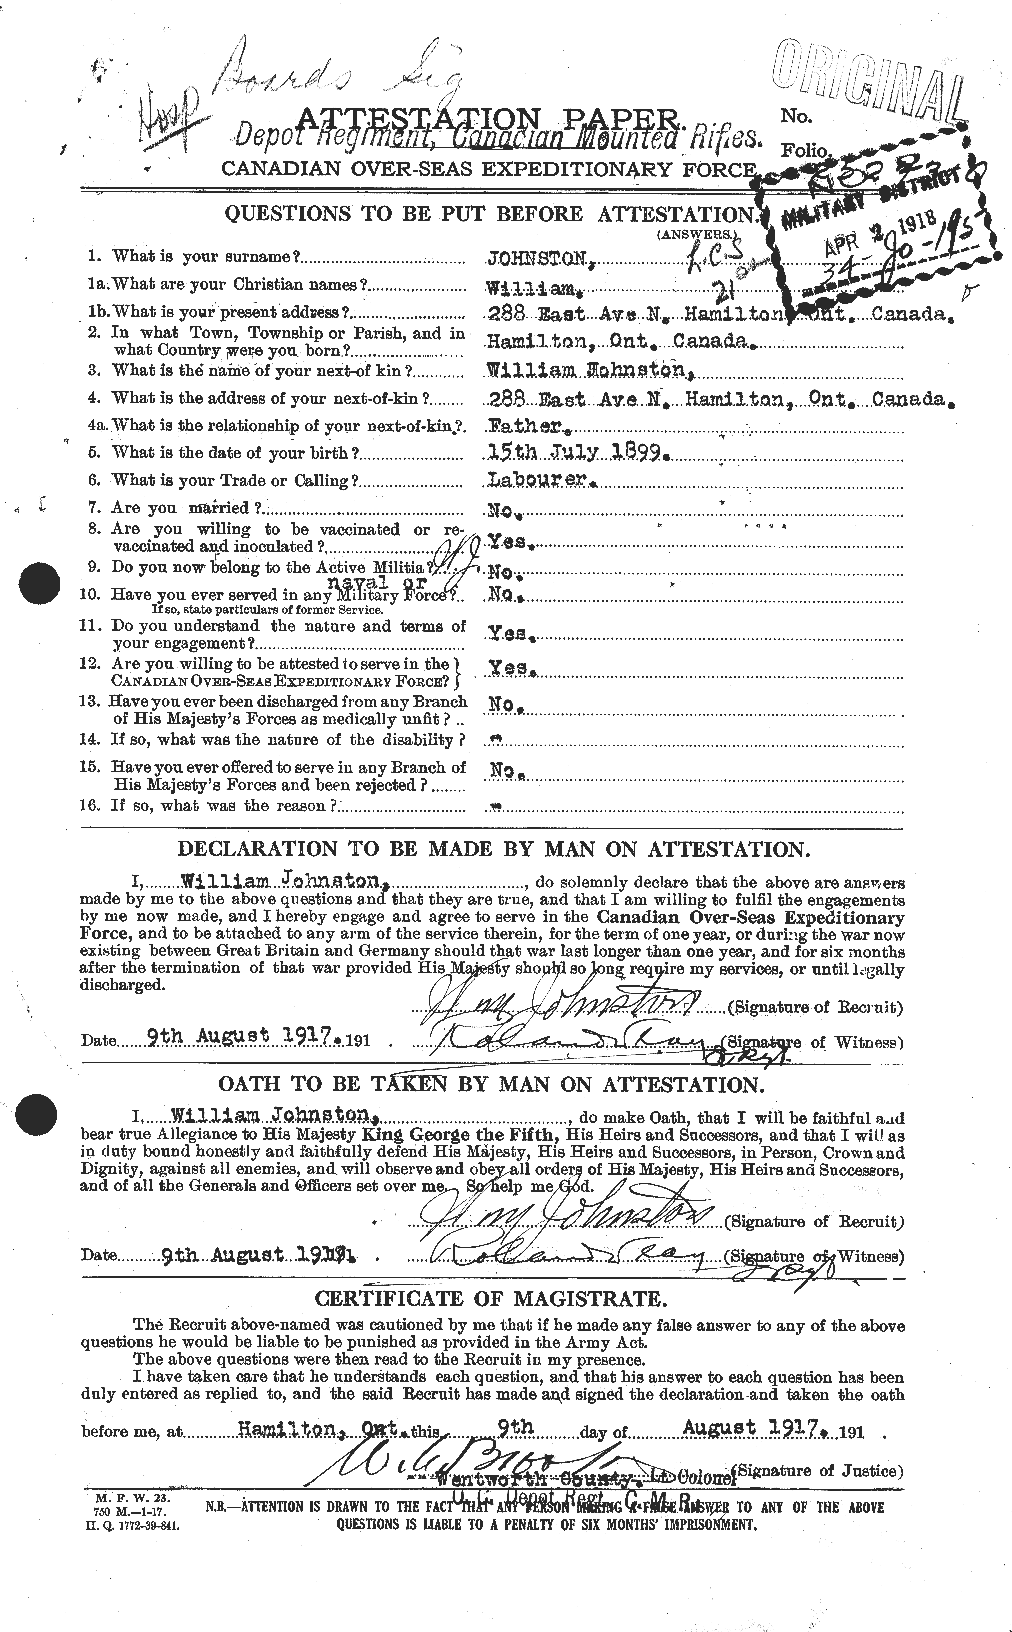 Personnel Records of the First World War - CEF 427268a